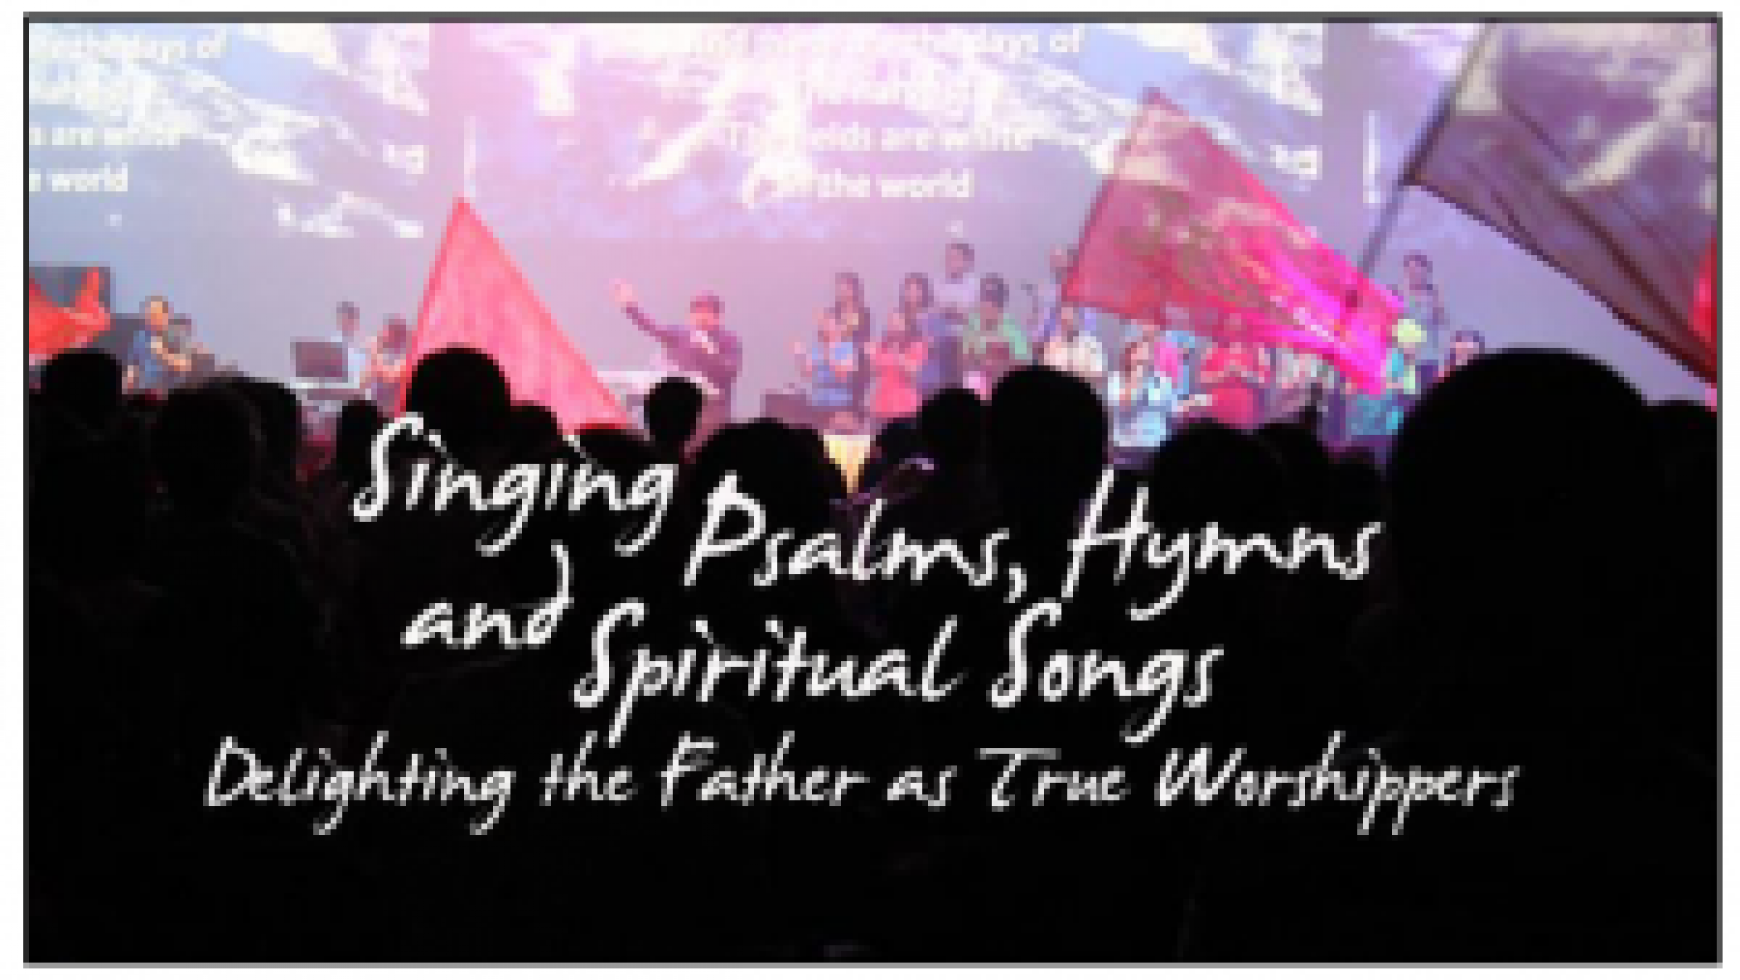 Singing Psalms, Hymns and Spiritual Songs